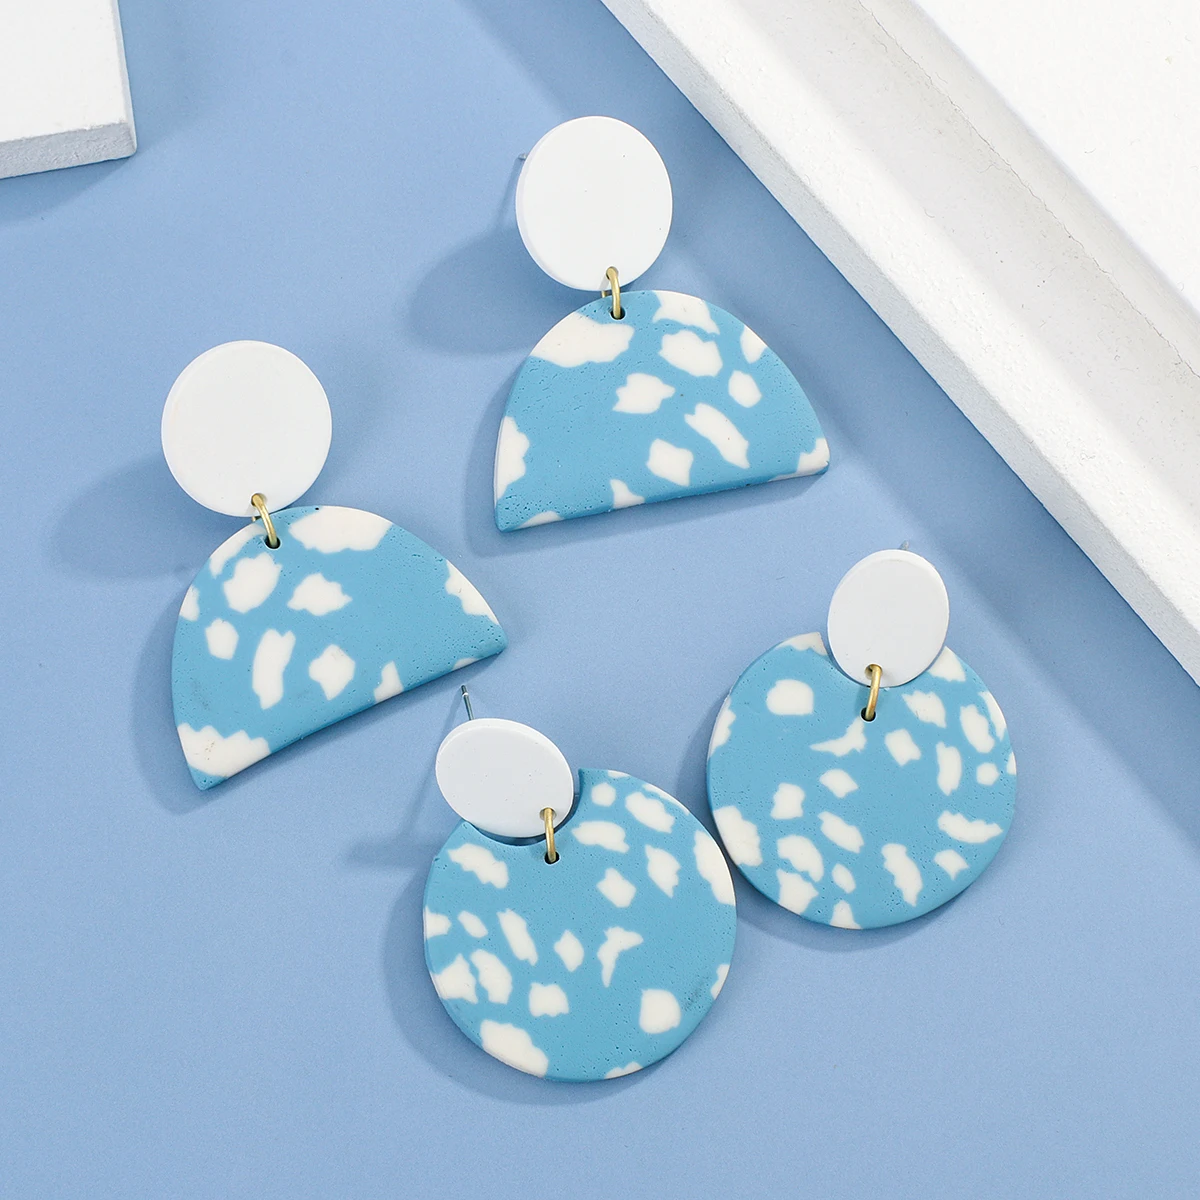 

AMORCOME Trendy Unique Polymer Clay Drop Earrings For Women 2021 Cute Geometric Round Pendant Dangle Earrings Fashion Jewelry